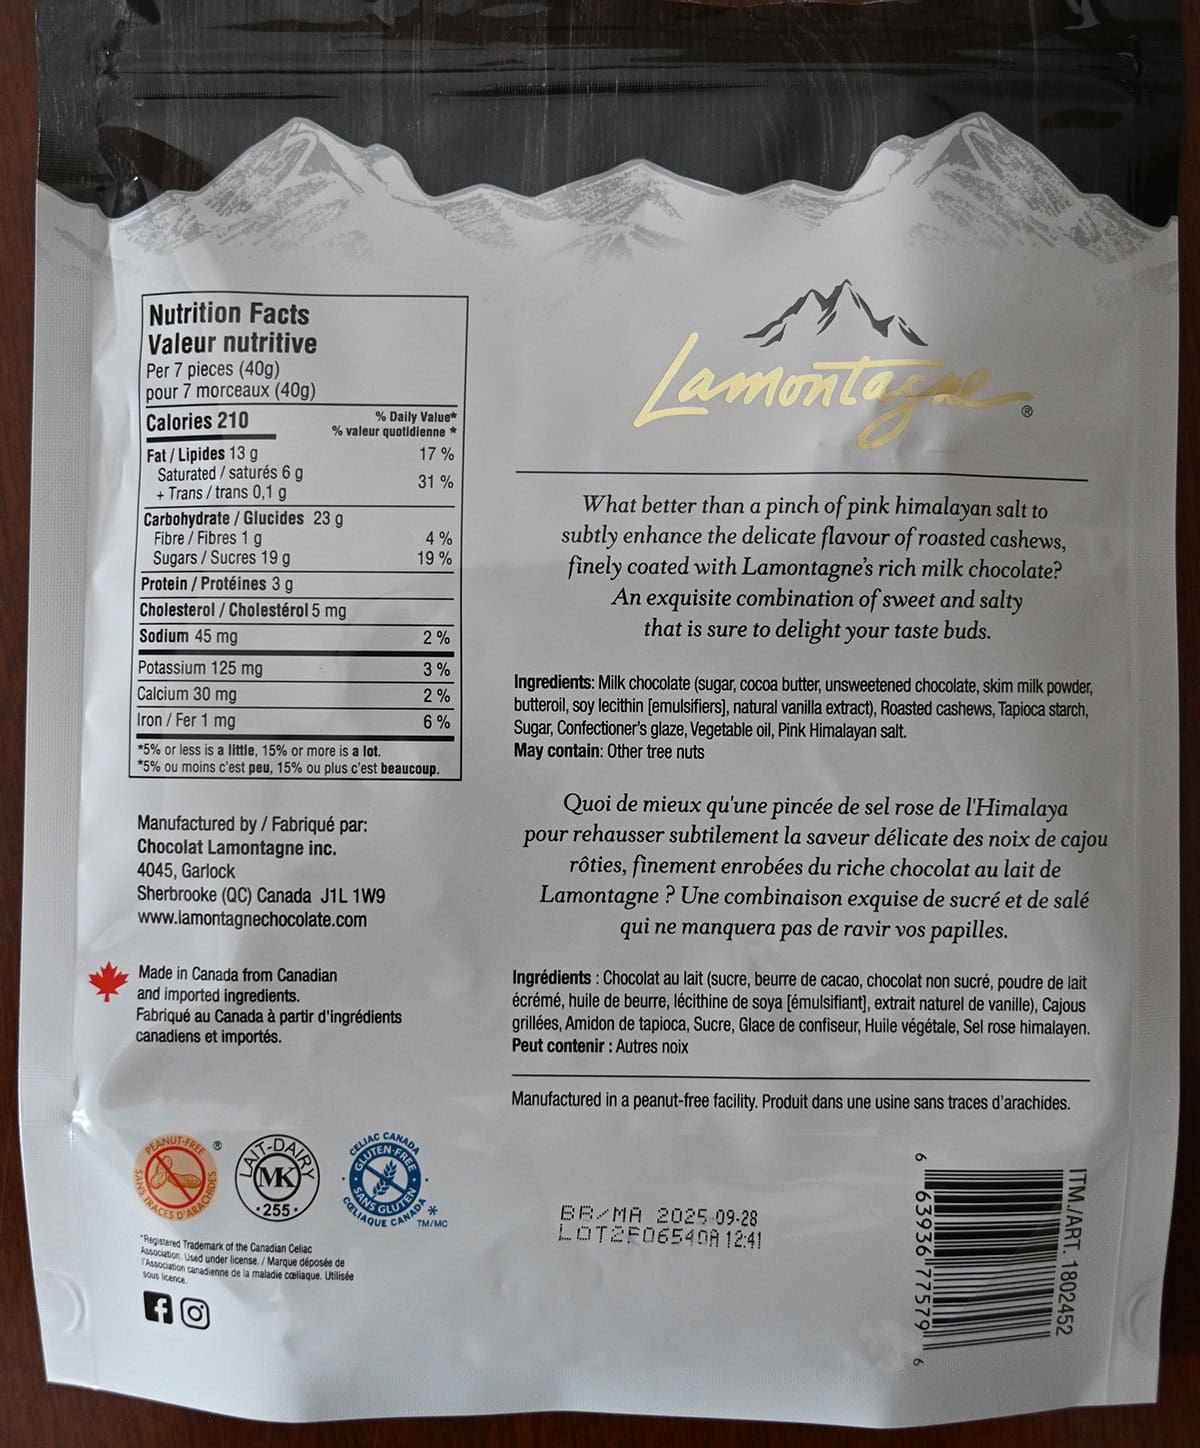 Image of the back of the bag showing company description, ingredients, nutrition facts and where the chocolates are made. 